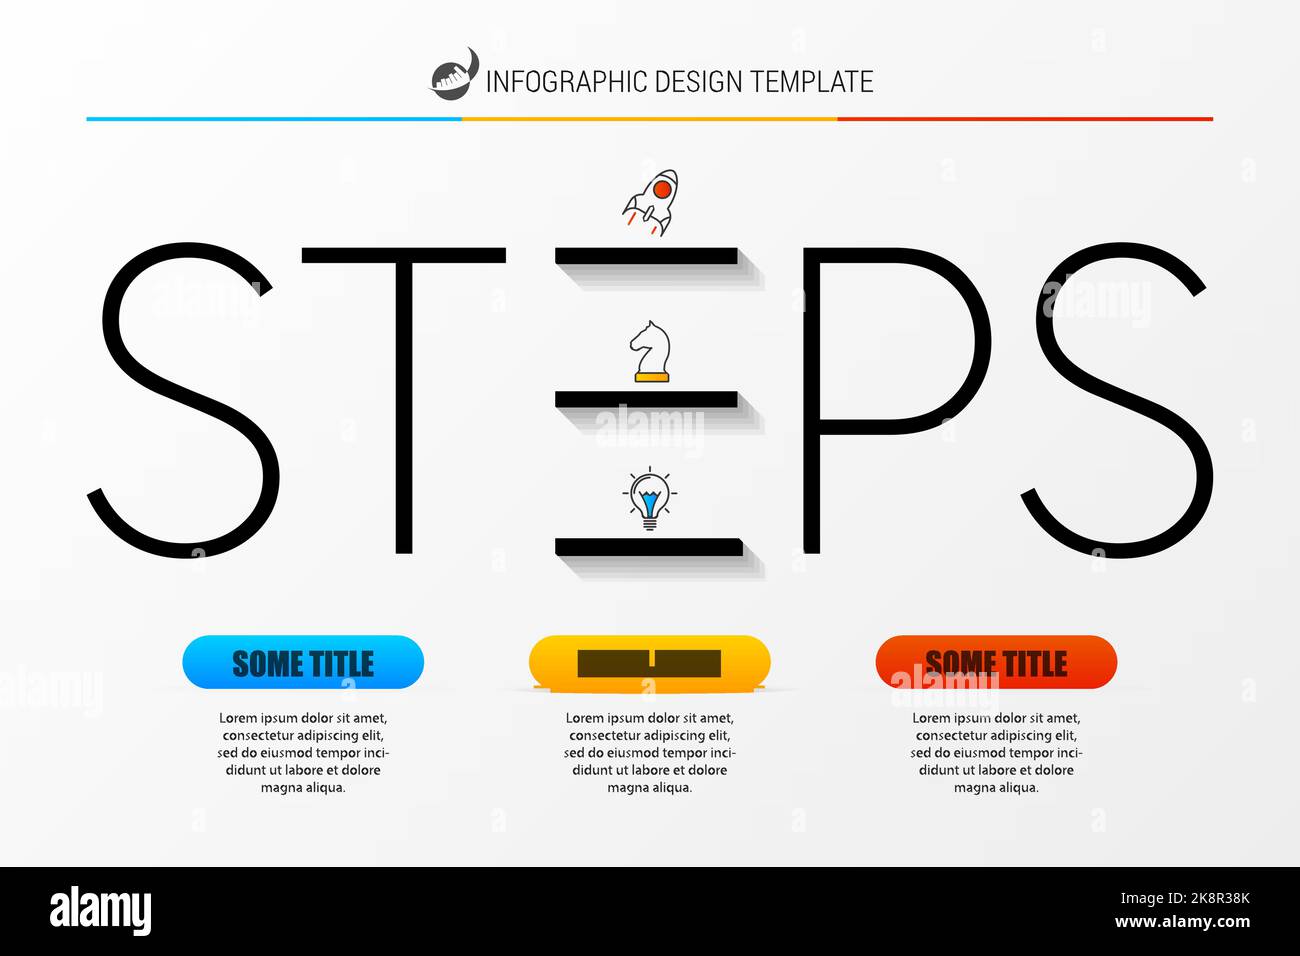 Infographic design template with 3 steps. Vector illustration Stock Vector